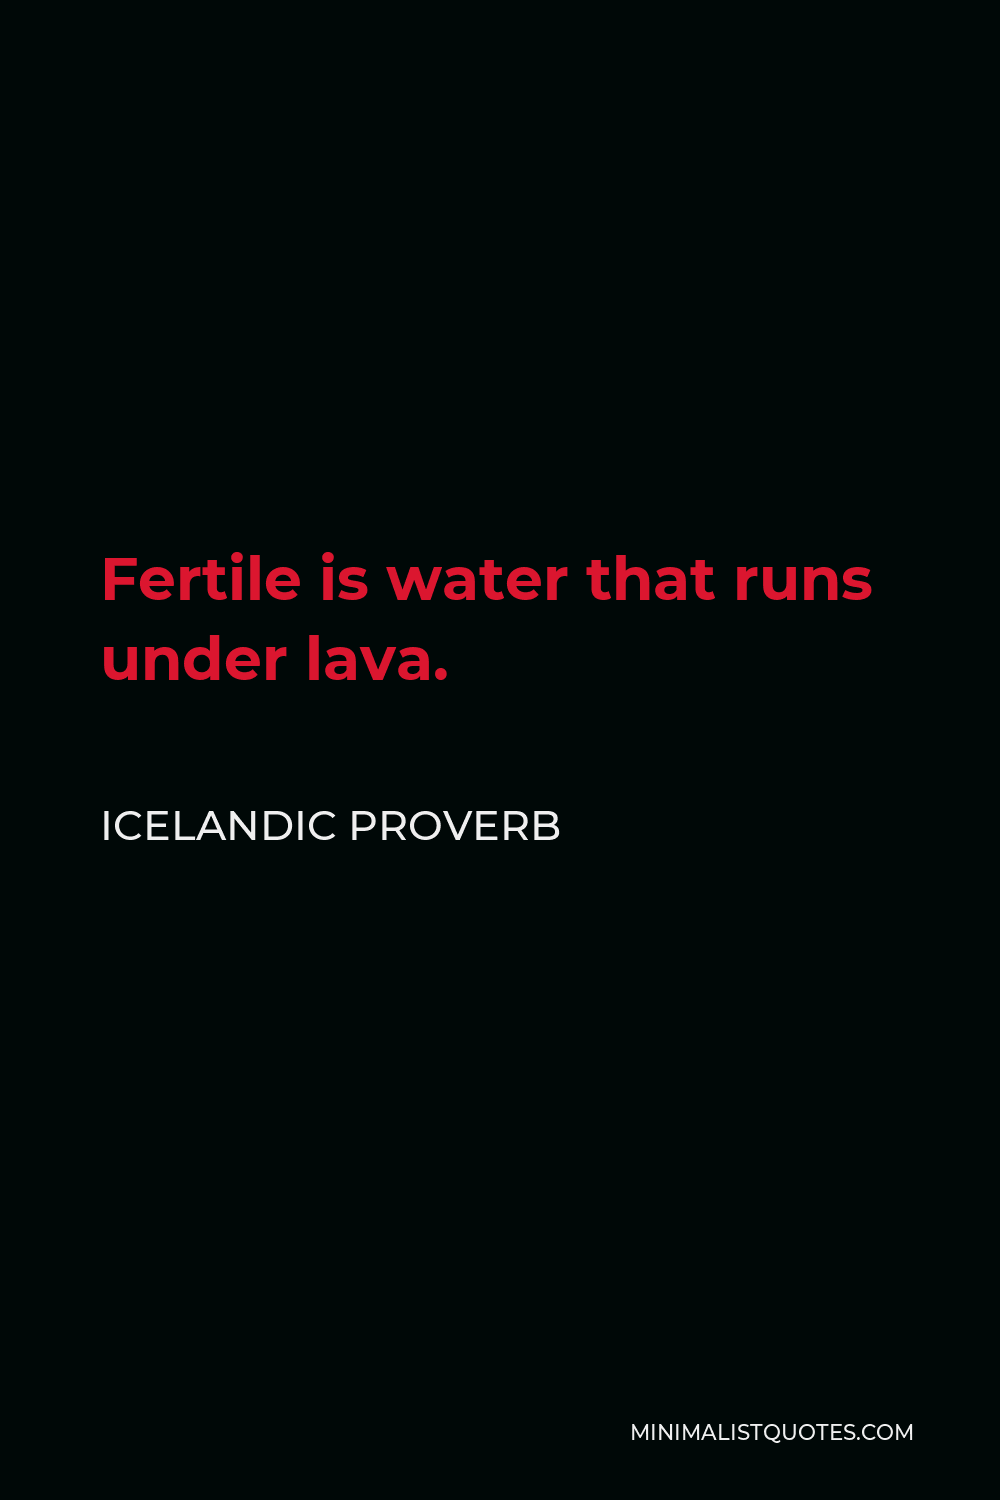 Icelandic Proverb Quote - Fertile is water that runs under lava.